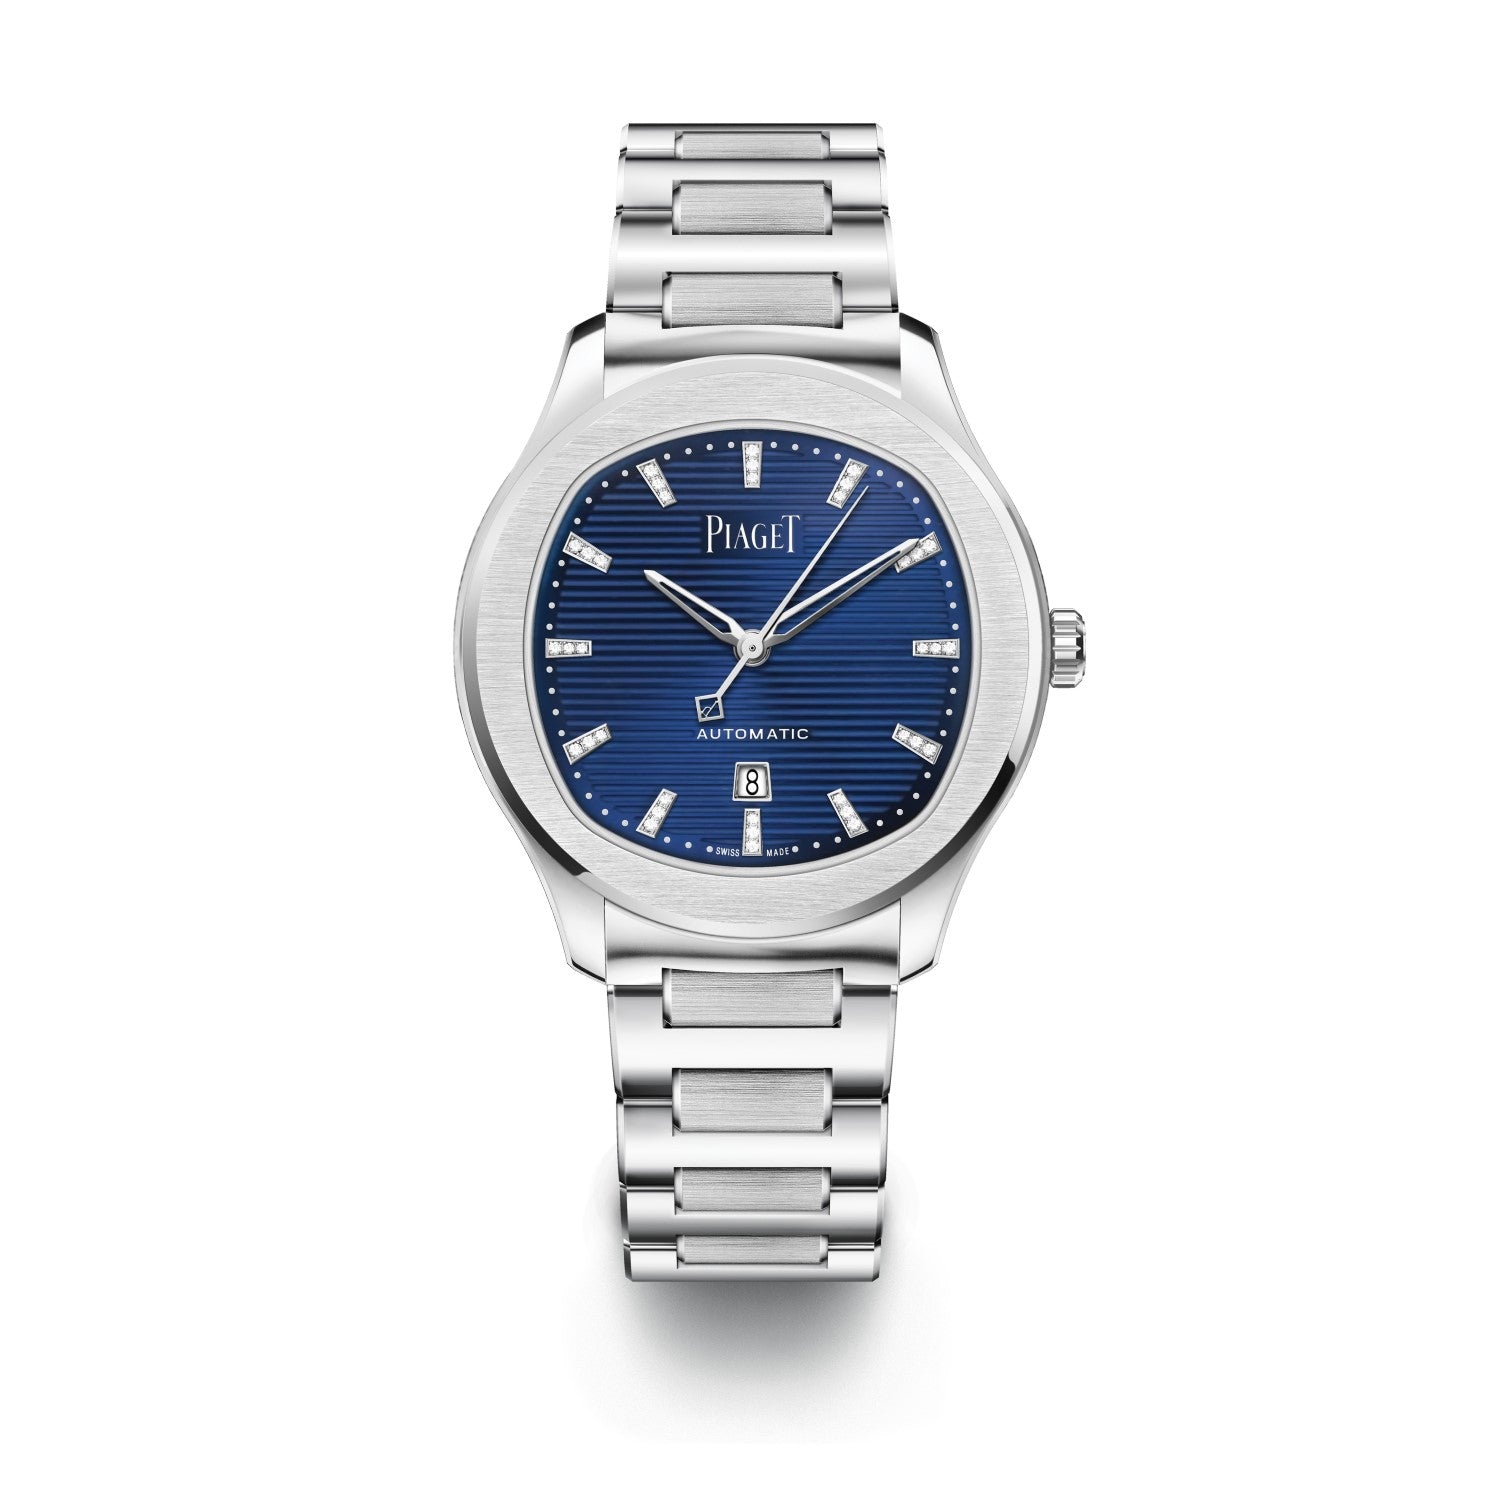 Piaget Polo Date watch, 36 mm